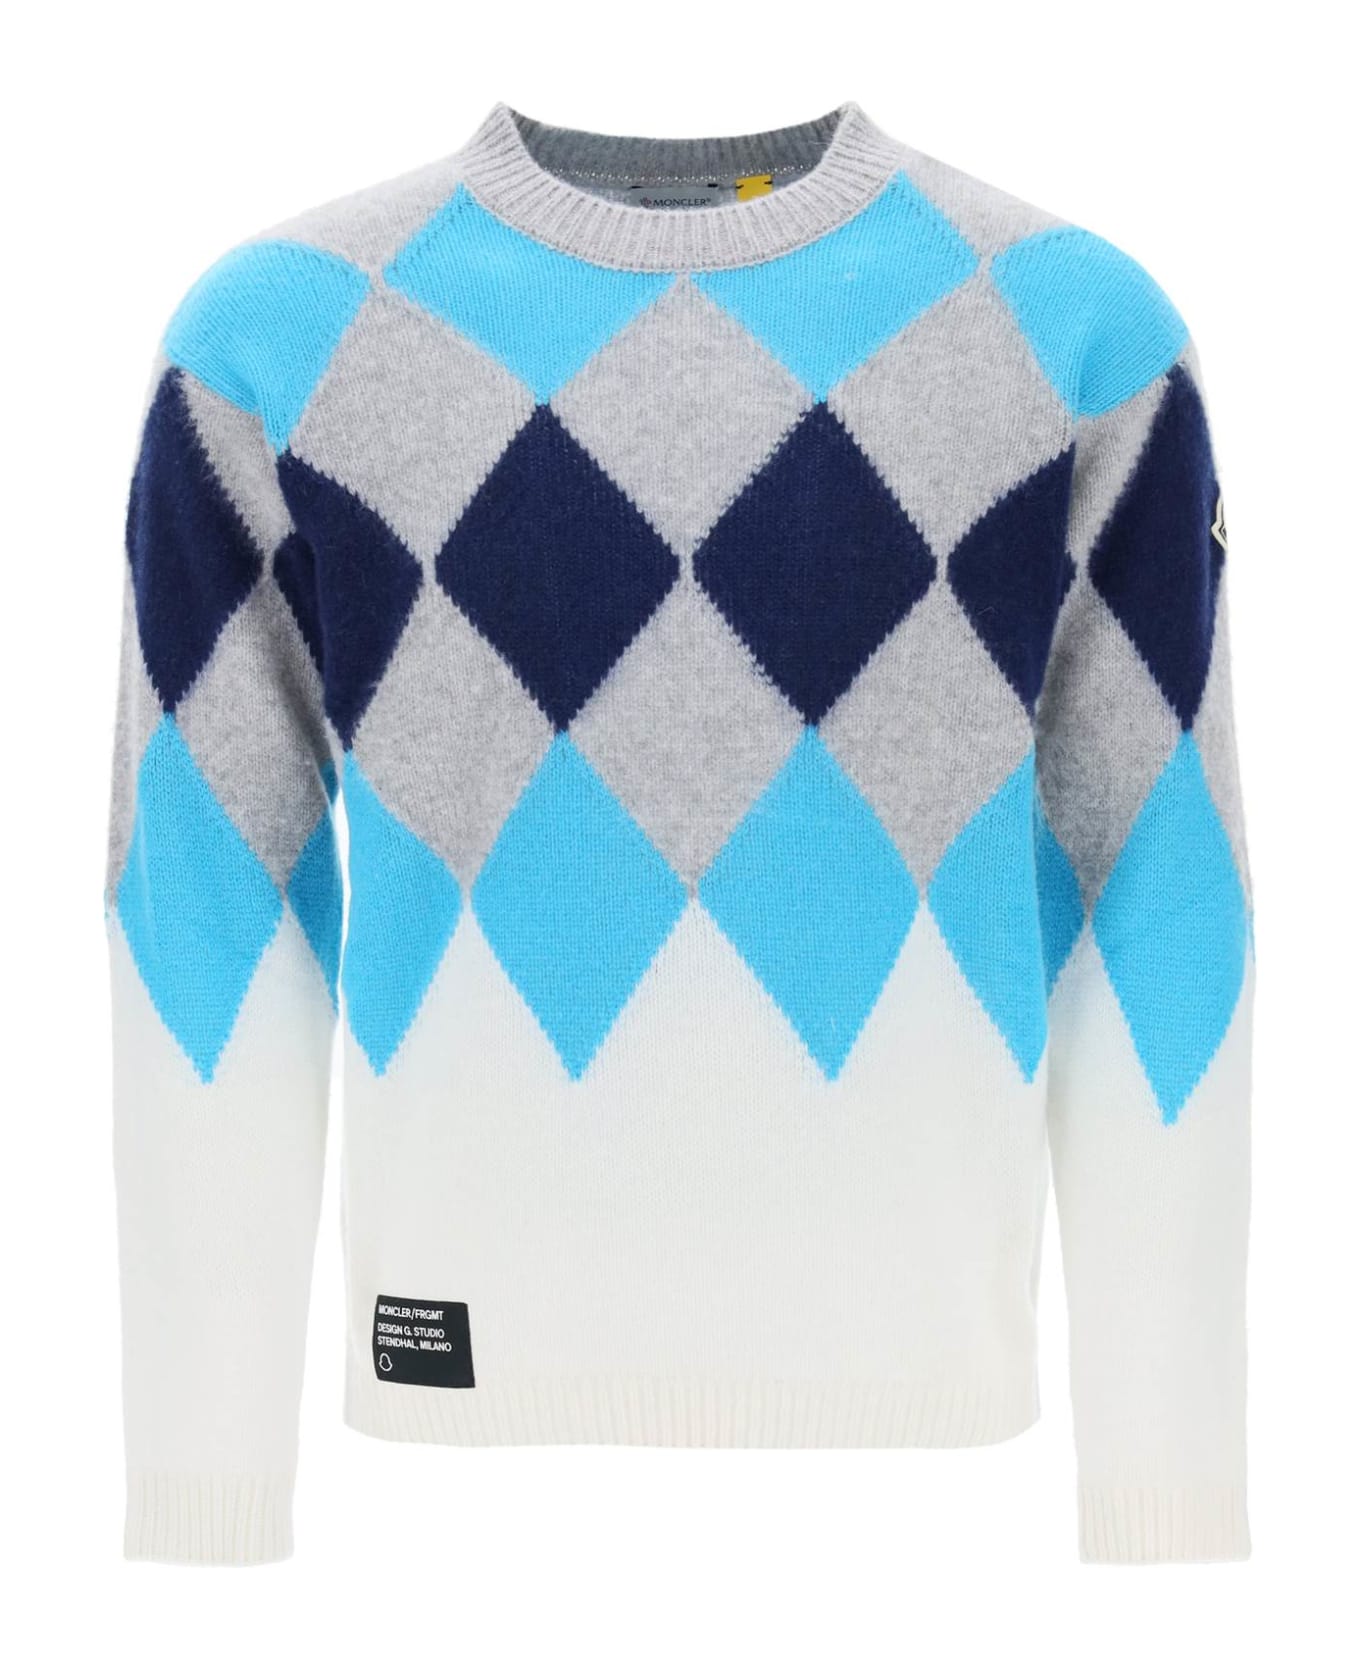 Moncler Genius Wool And Cashmere Sweater - panna